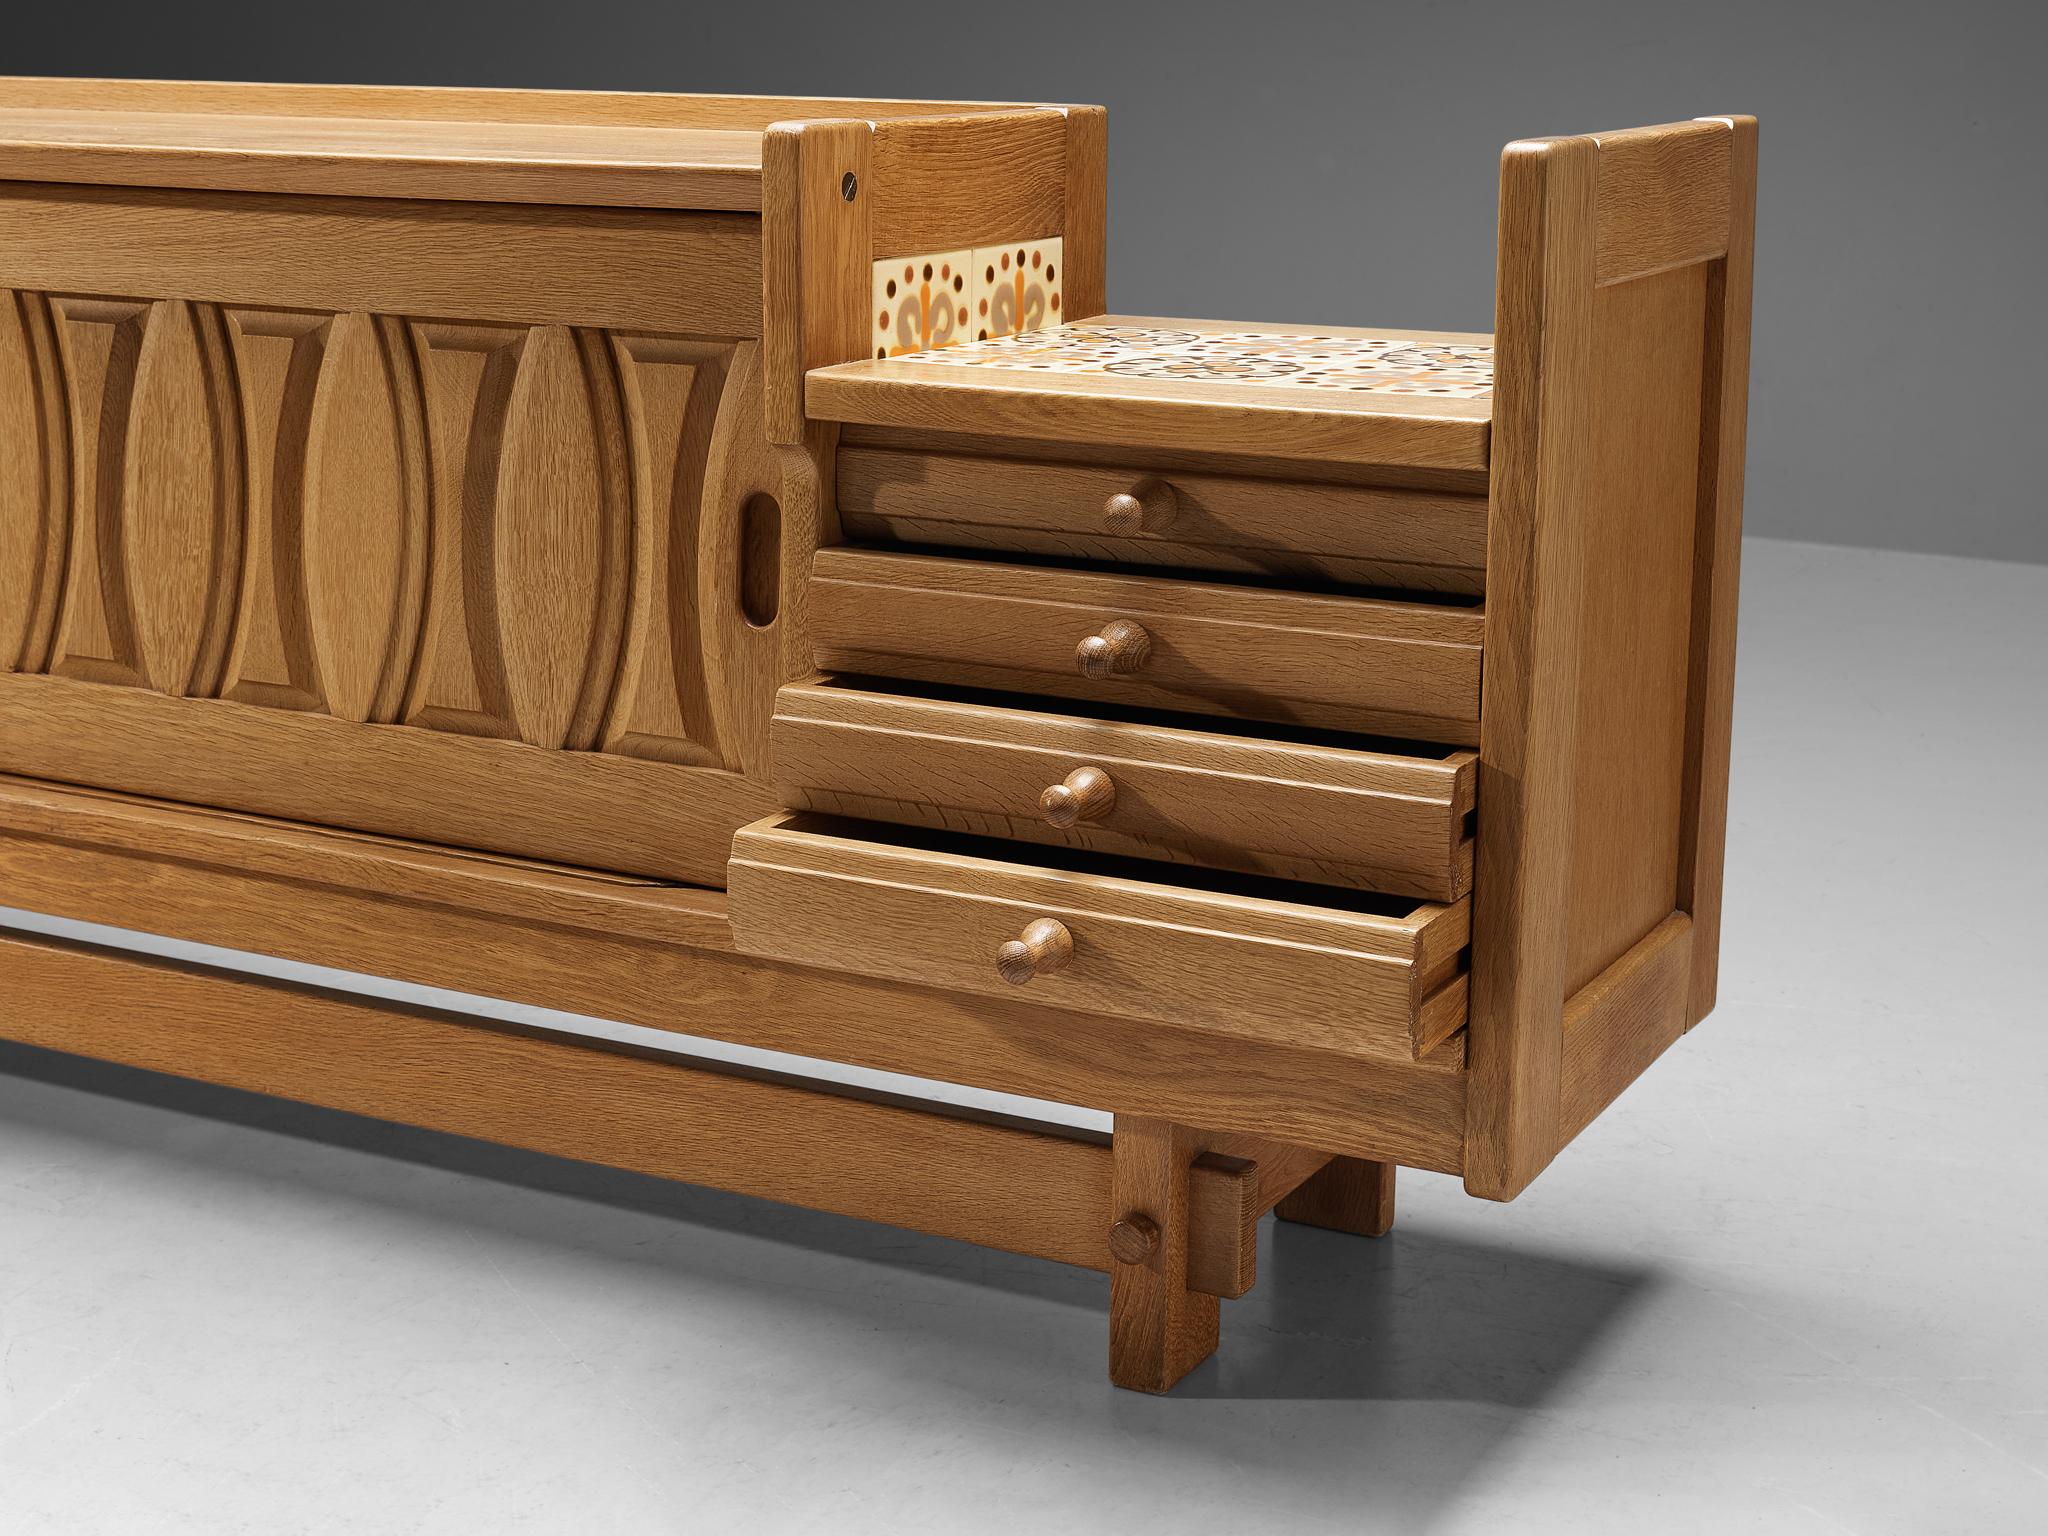 Guillerme & Chambron 'Simon' Sideboard in Solid Oak and Ceramics